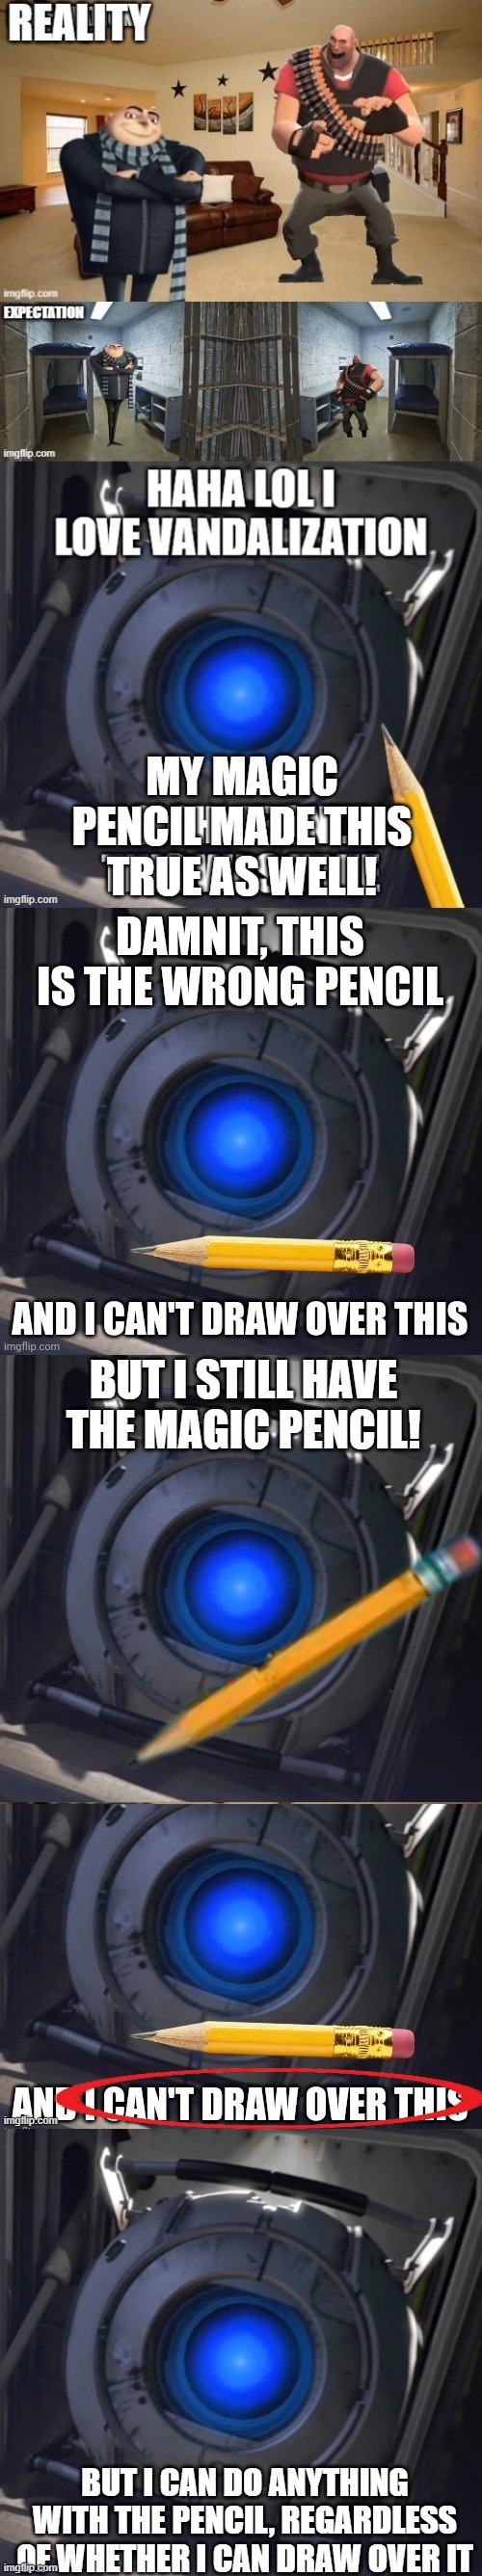 You can't underestimate The Pencil | BUT I CAN DO ANYTHING WITH THE PENCIL, REGARDLESS OF WHETHER I CAN DRAW OVER IT | image tagged in wheatley | made w/ Imgflip meme maker